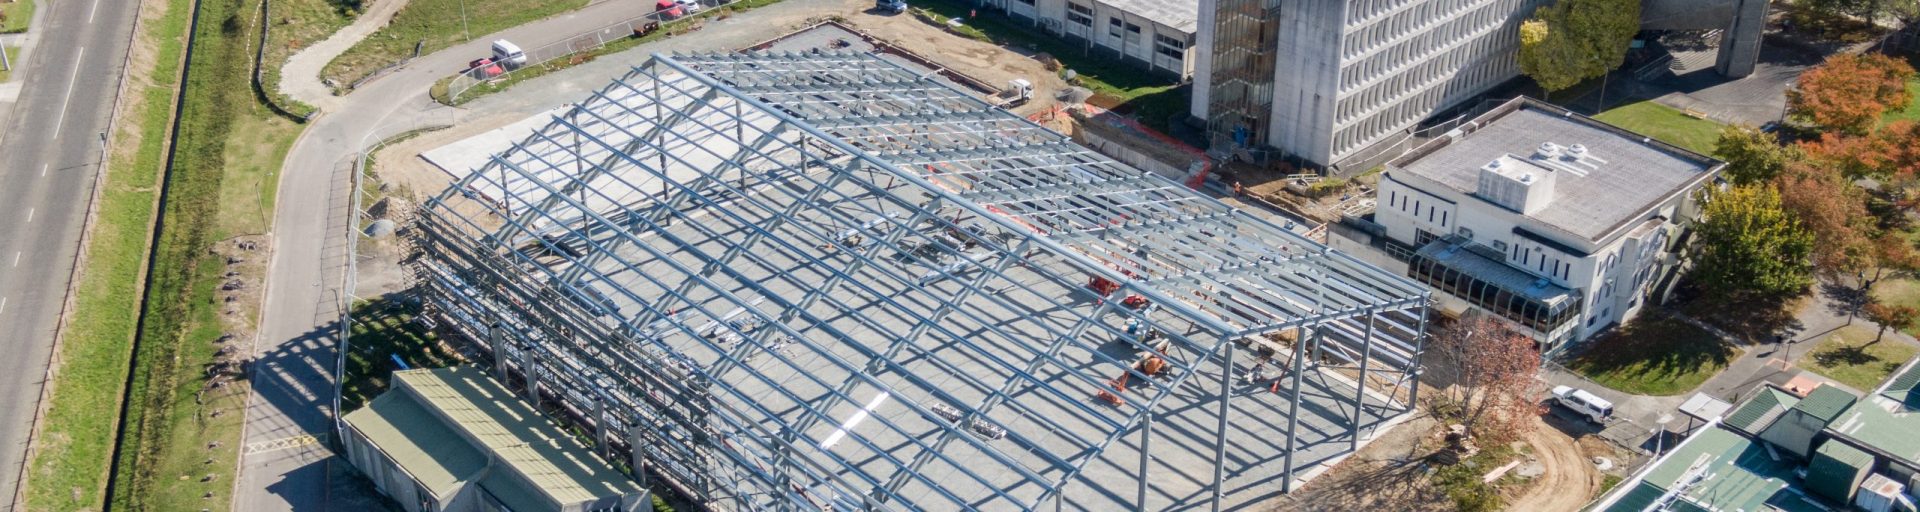 large scale steel frame building in construction